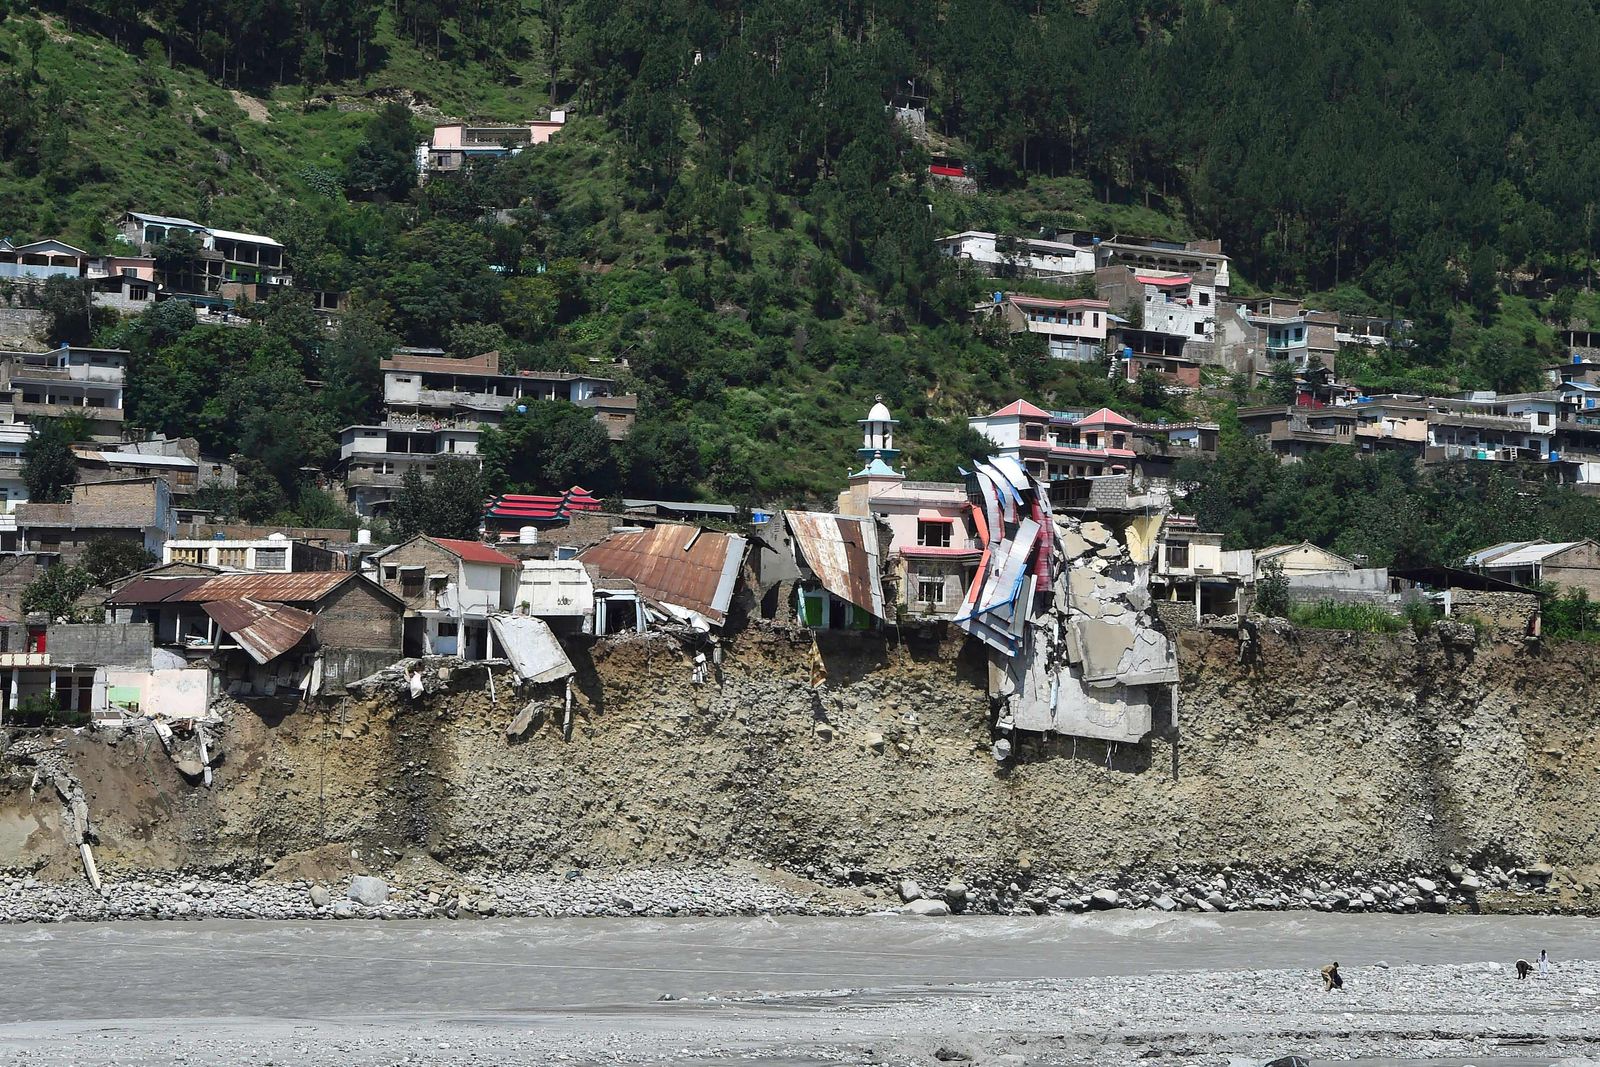 A general view shows houses destroyed by flash floods near the banks of the Swat River after heavy rains in Madyan area of Swat valley, Khyber Pakhtunkhwa province, on August 31, 2022. - Aid efforts ramped up across flooded Pakistan on August 30 to help tens of millions of people affected by relentless monsoon rains that have submerged a third of the country and claimed more than 1,100 lives. (Photo by Abdul MAJEED / AFP) - AFP